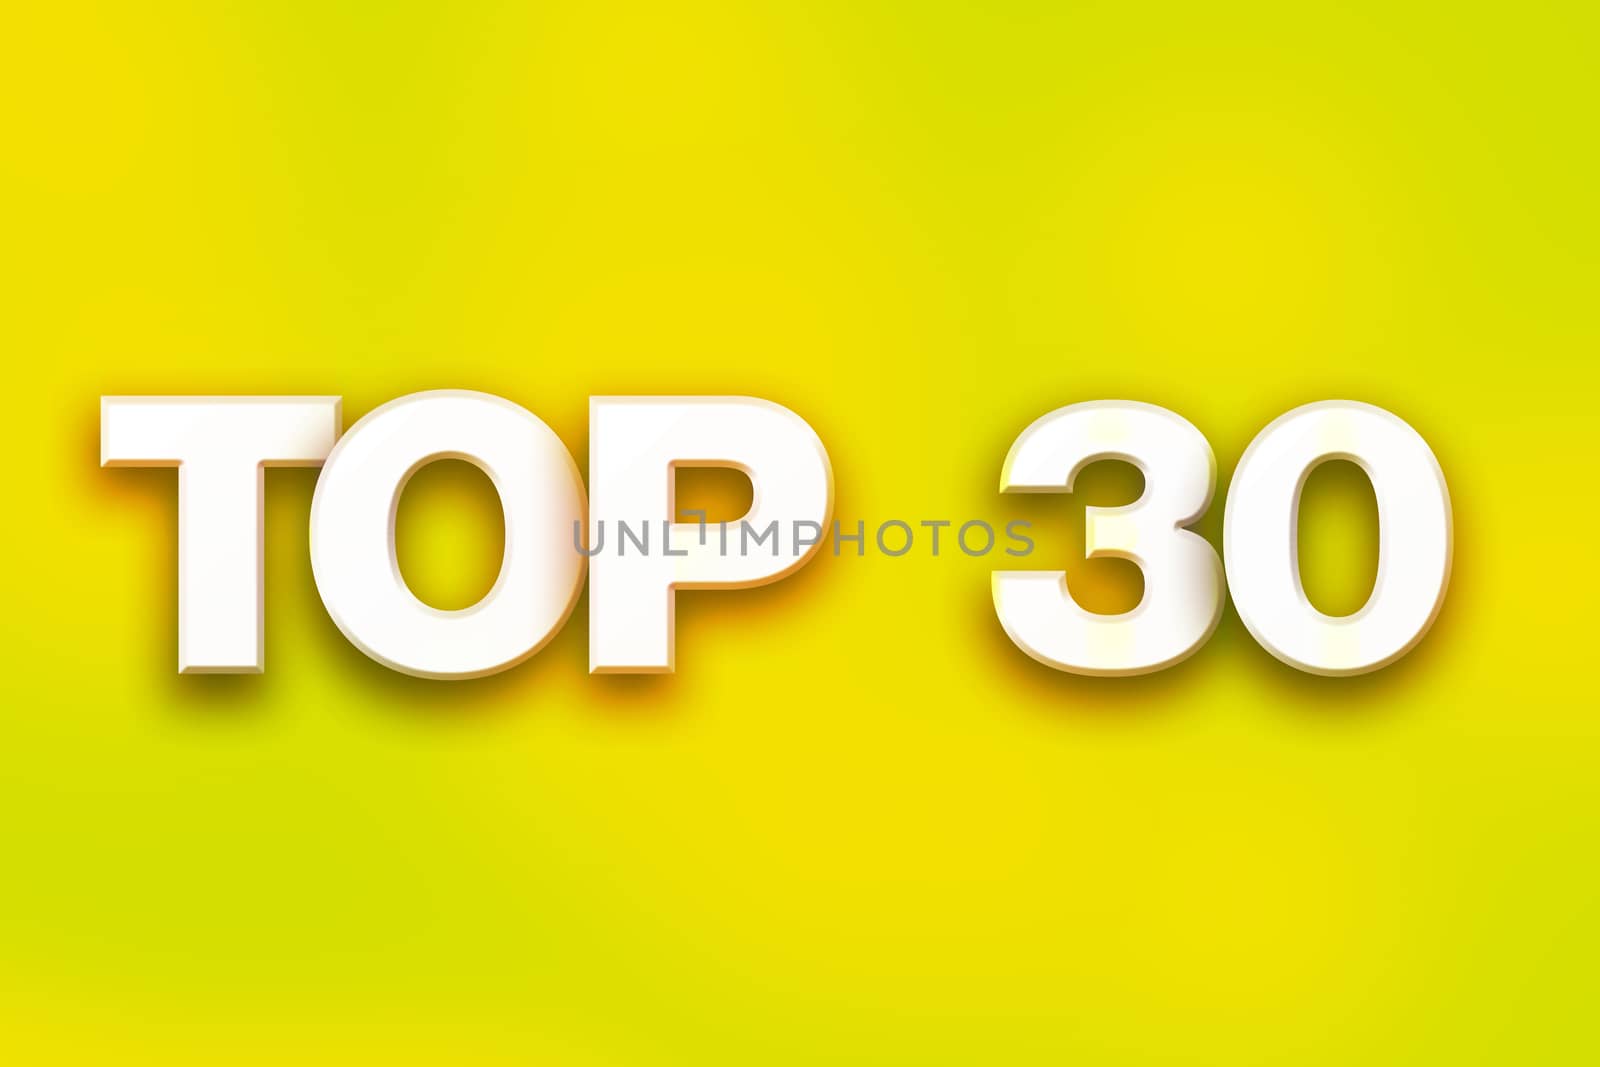 The word "Top 30" written in white 3D letters on a colorful background concept and theme.